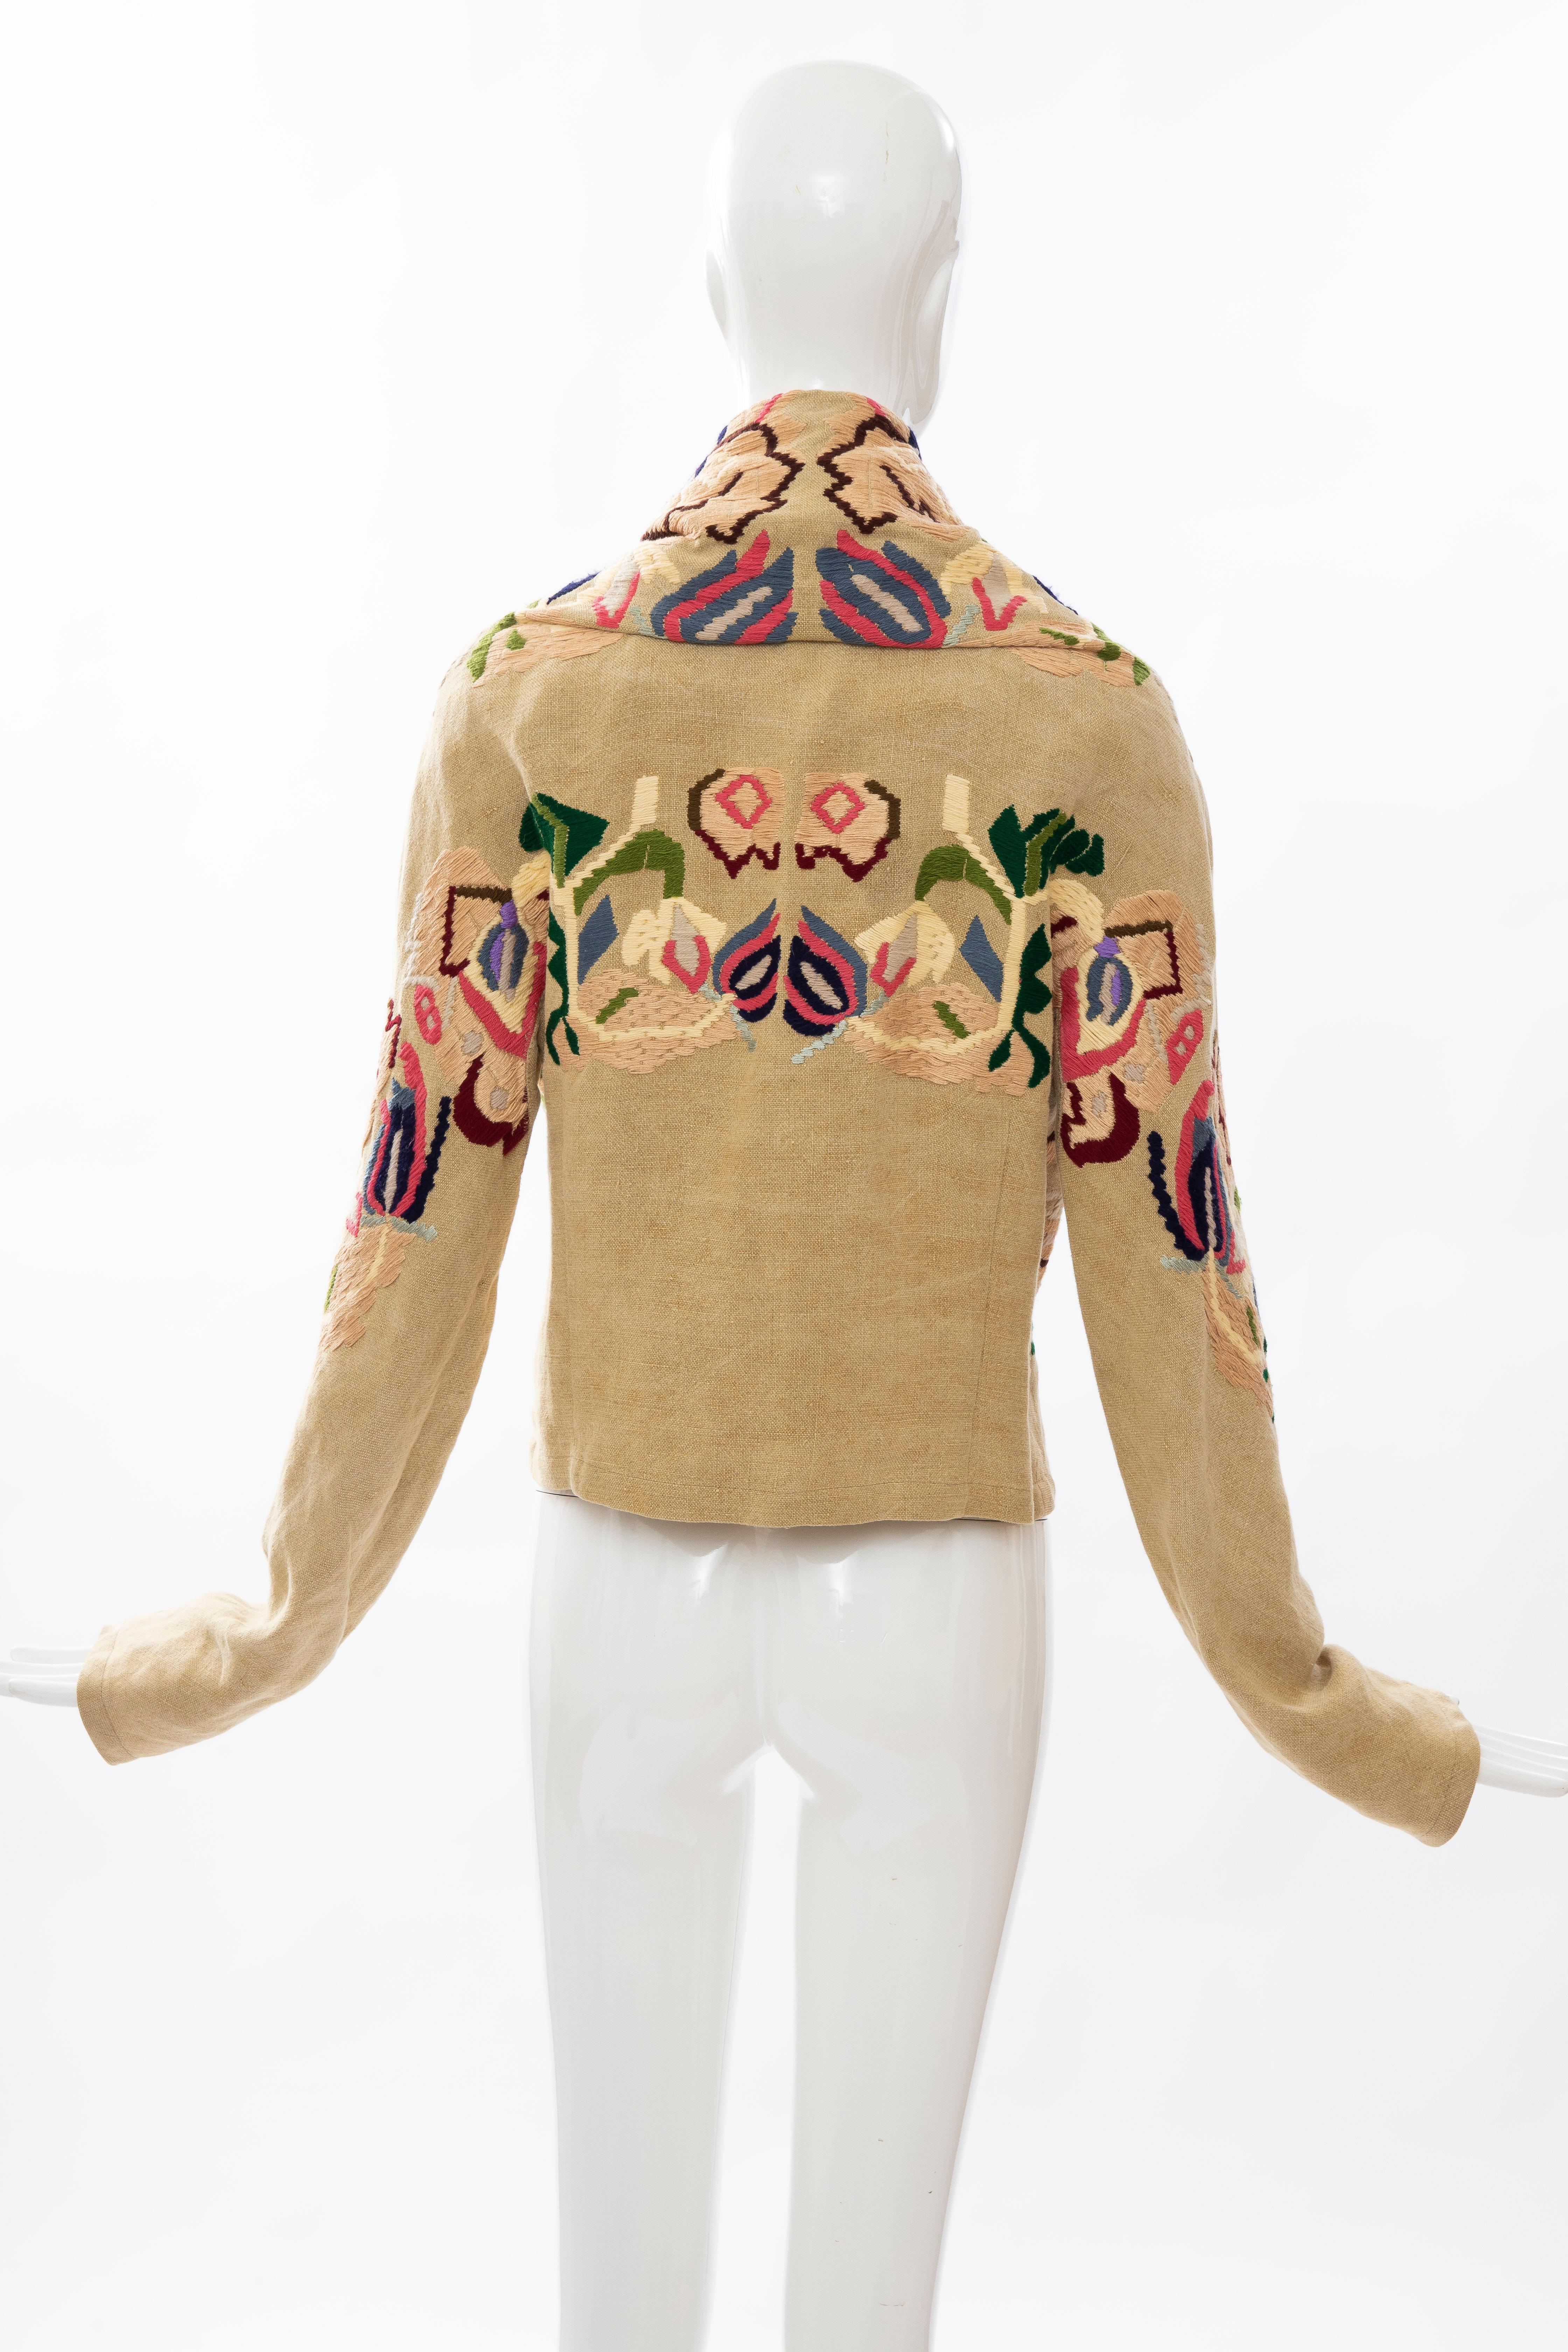 Dries Van Noten Runway Floral Embroidered Linen Jacket, Fall 2002 In Good Condition For Sale In Cincinnati, OH